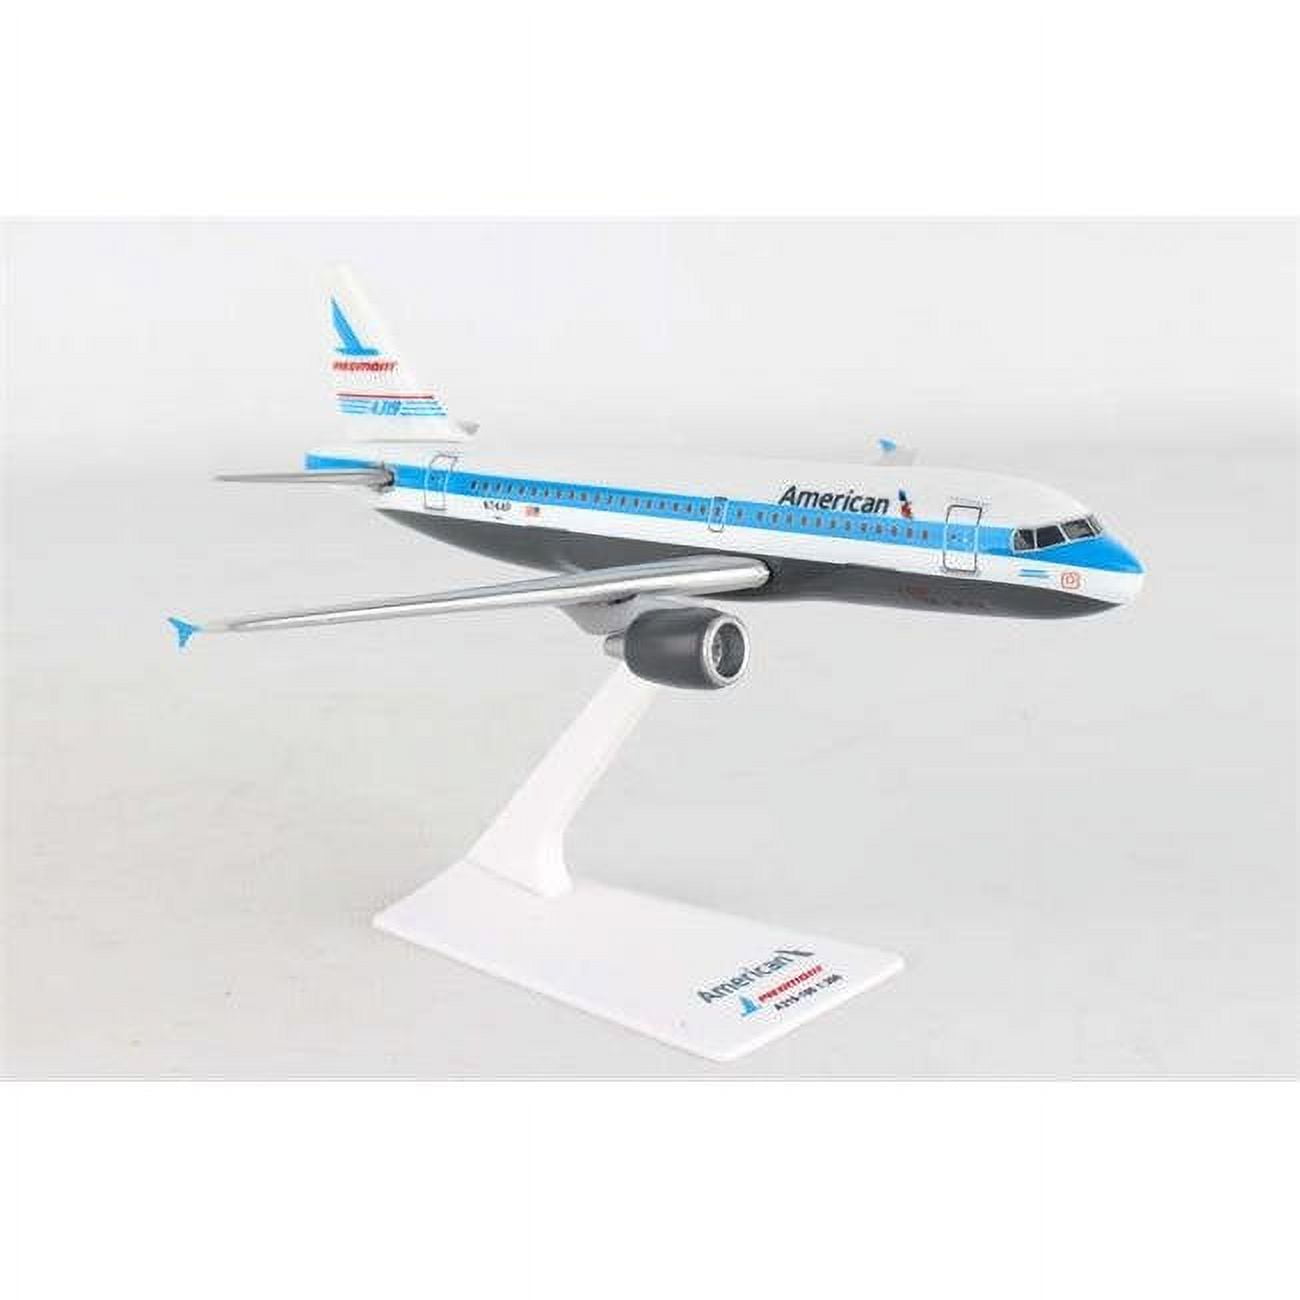 Lp0029ps A319 American & Psa A319 1-200 Heritage Livery Model Airplane